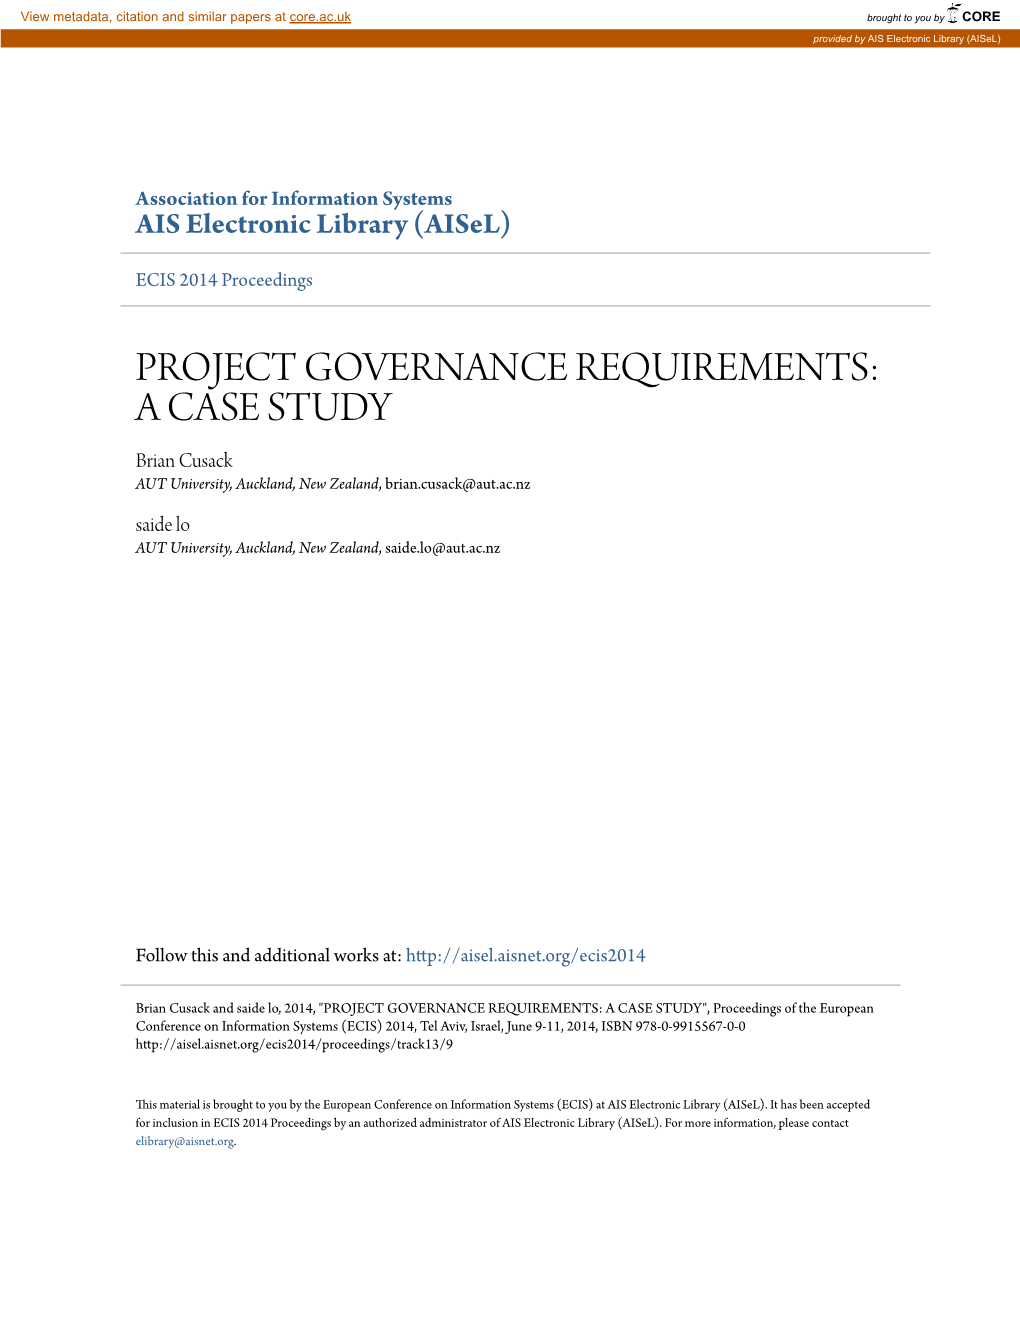 PROJECT GOVERNANCE REQUIREMENTS: a CASE STUDY Brian Cusack AUT University, Auckland, New Zealand, Brian.Cusack@Aut.Ac.Nz